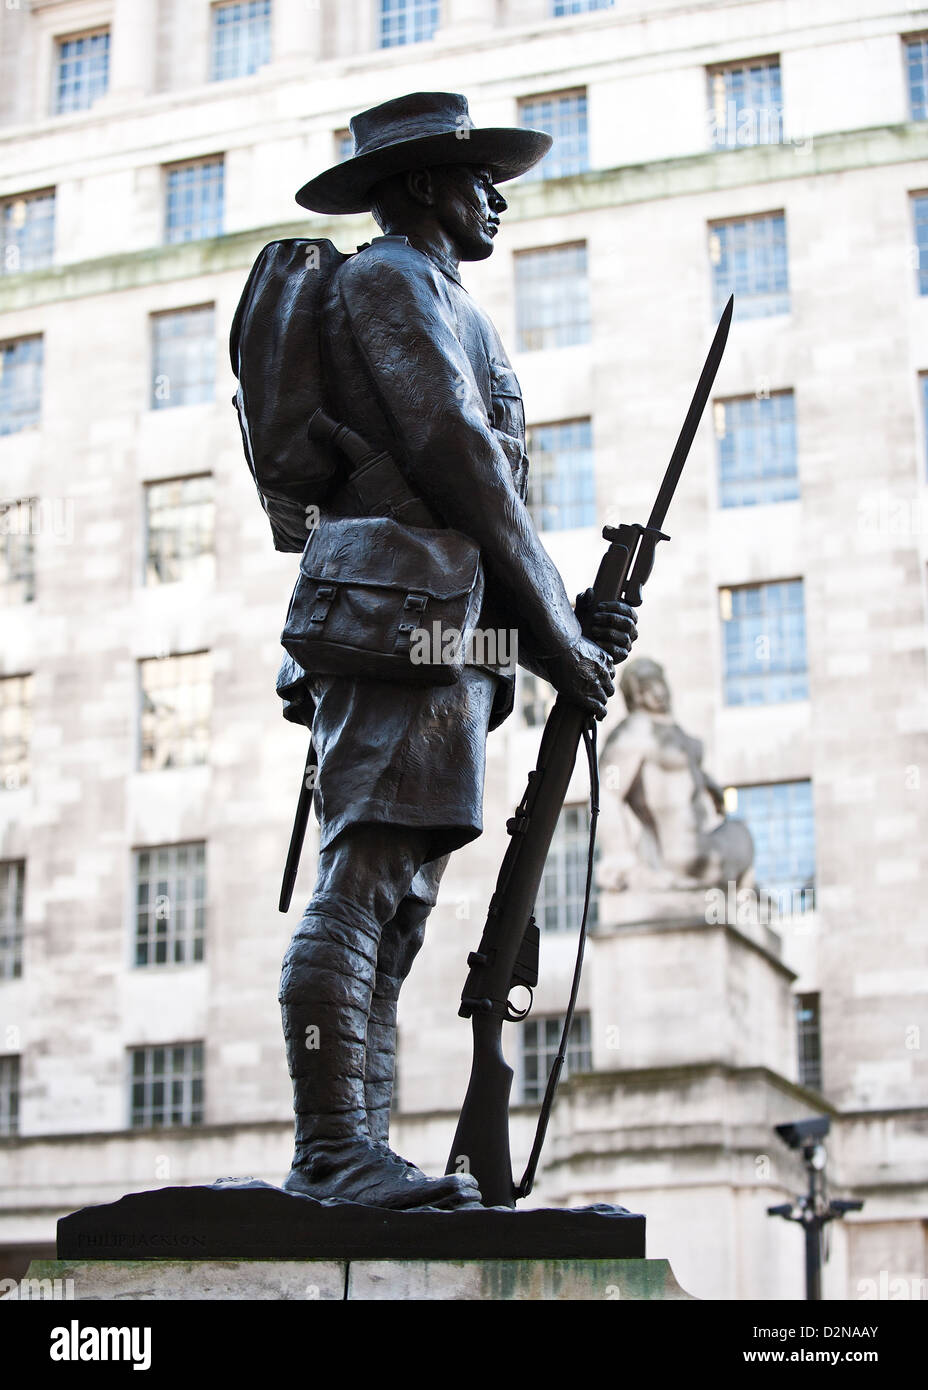 The monument to the Gurkha Soldier in London Stock Photo